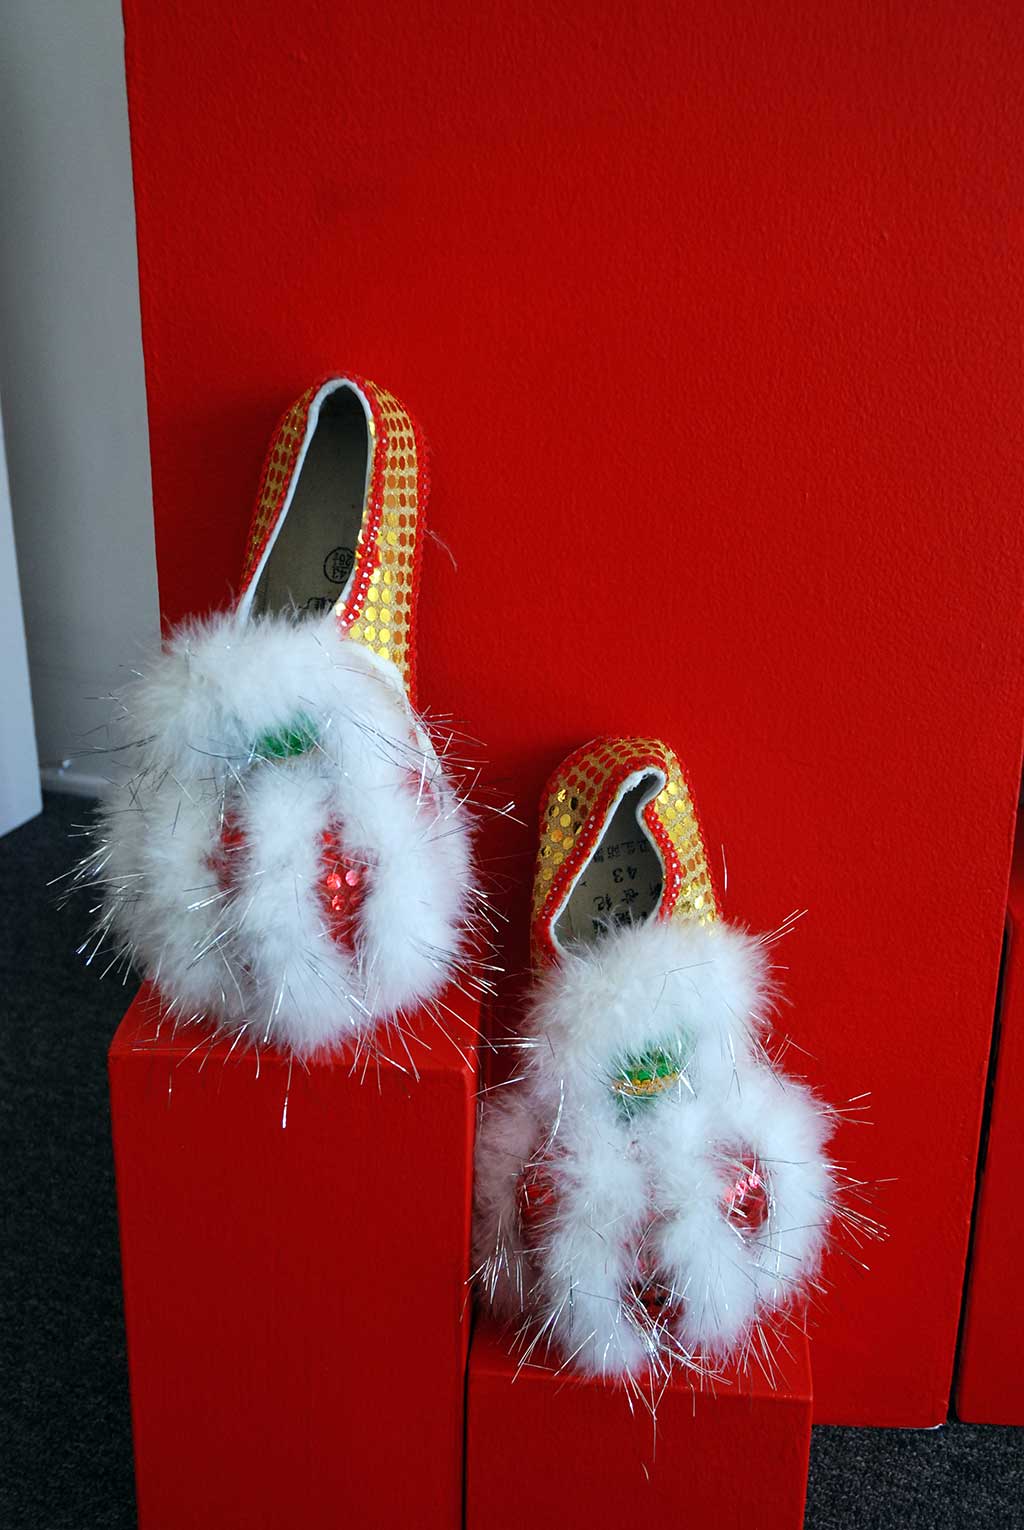 Lion Head shoes made by Kei Lun Martial Arts